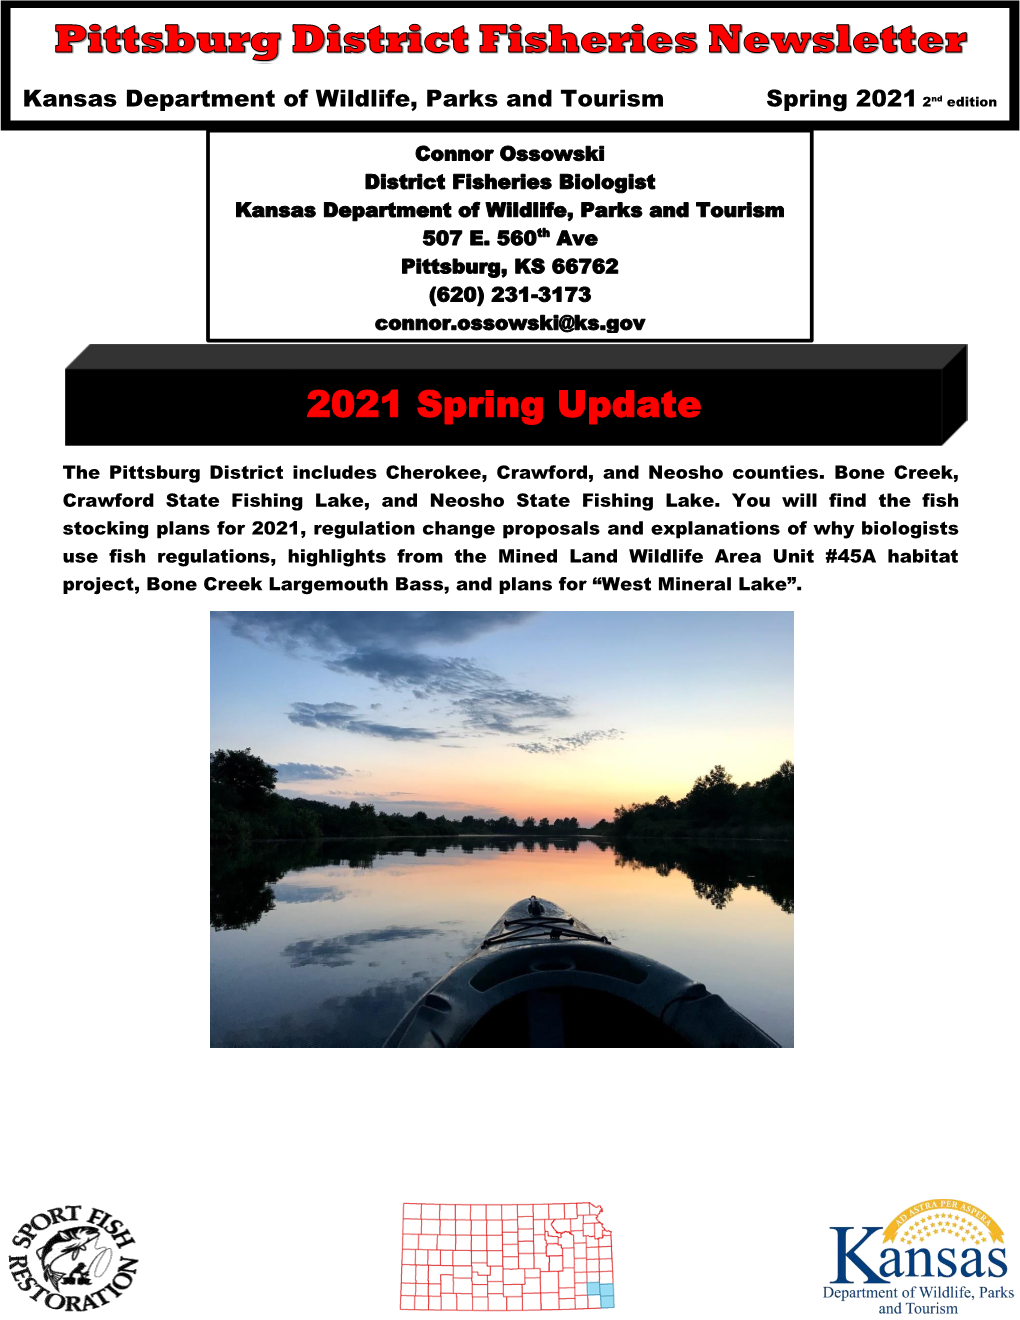 Pittsburg District Fisheries Newsletter Spring Ver.2 4-13-2021